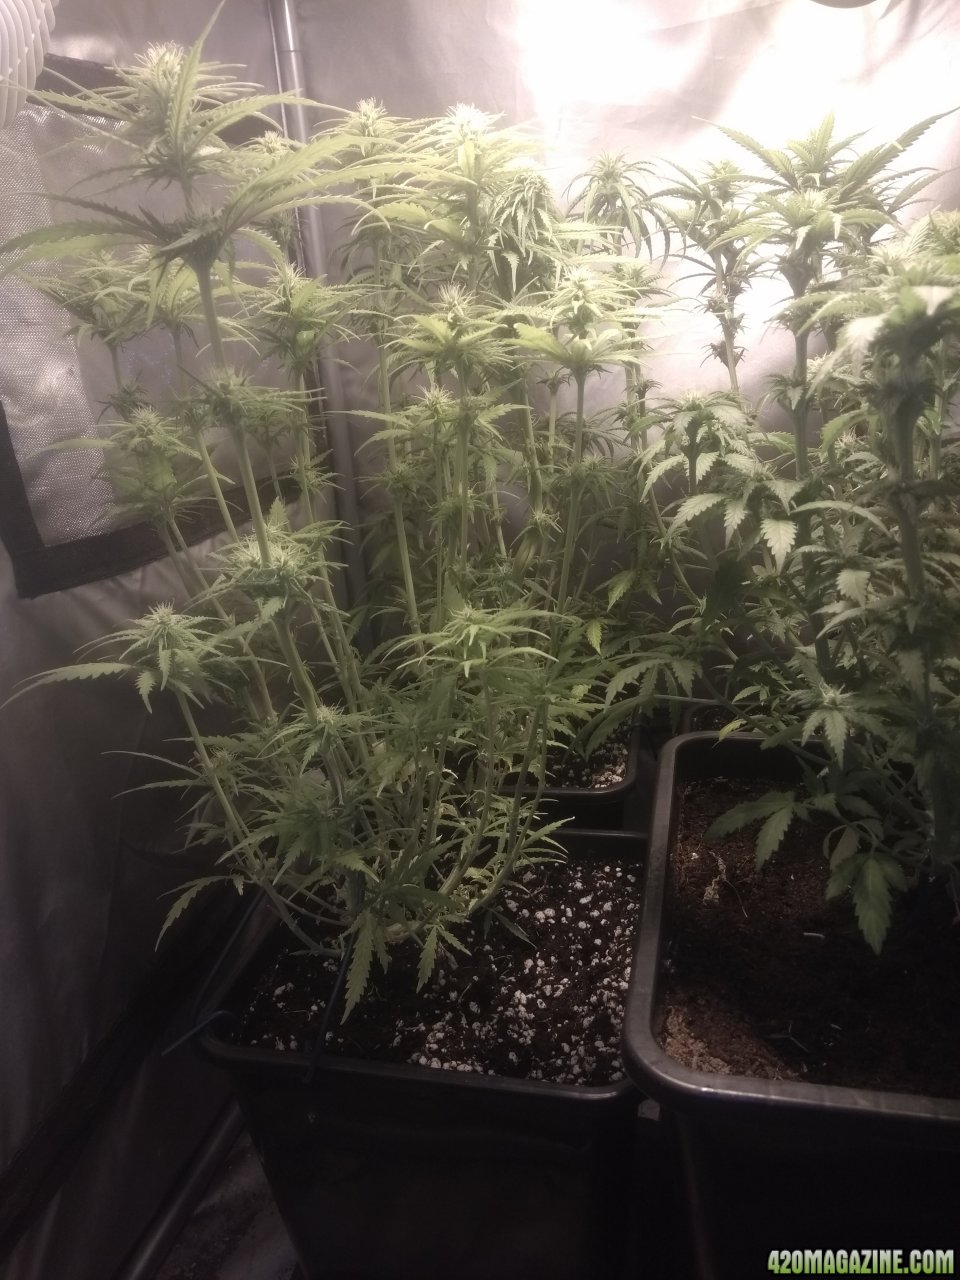 Week 3 through the branches